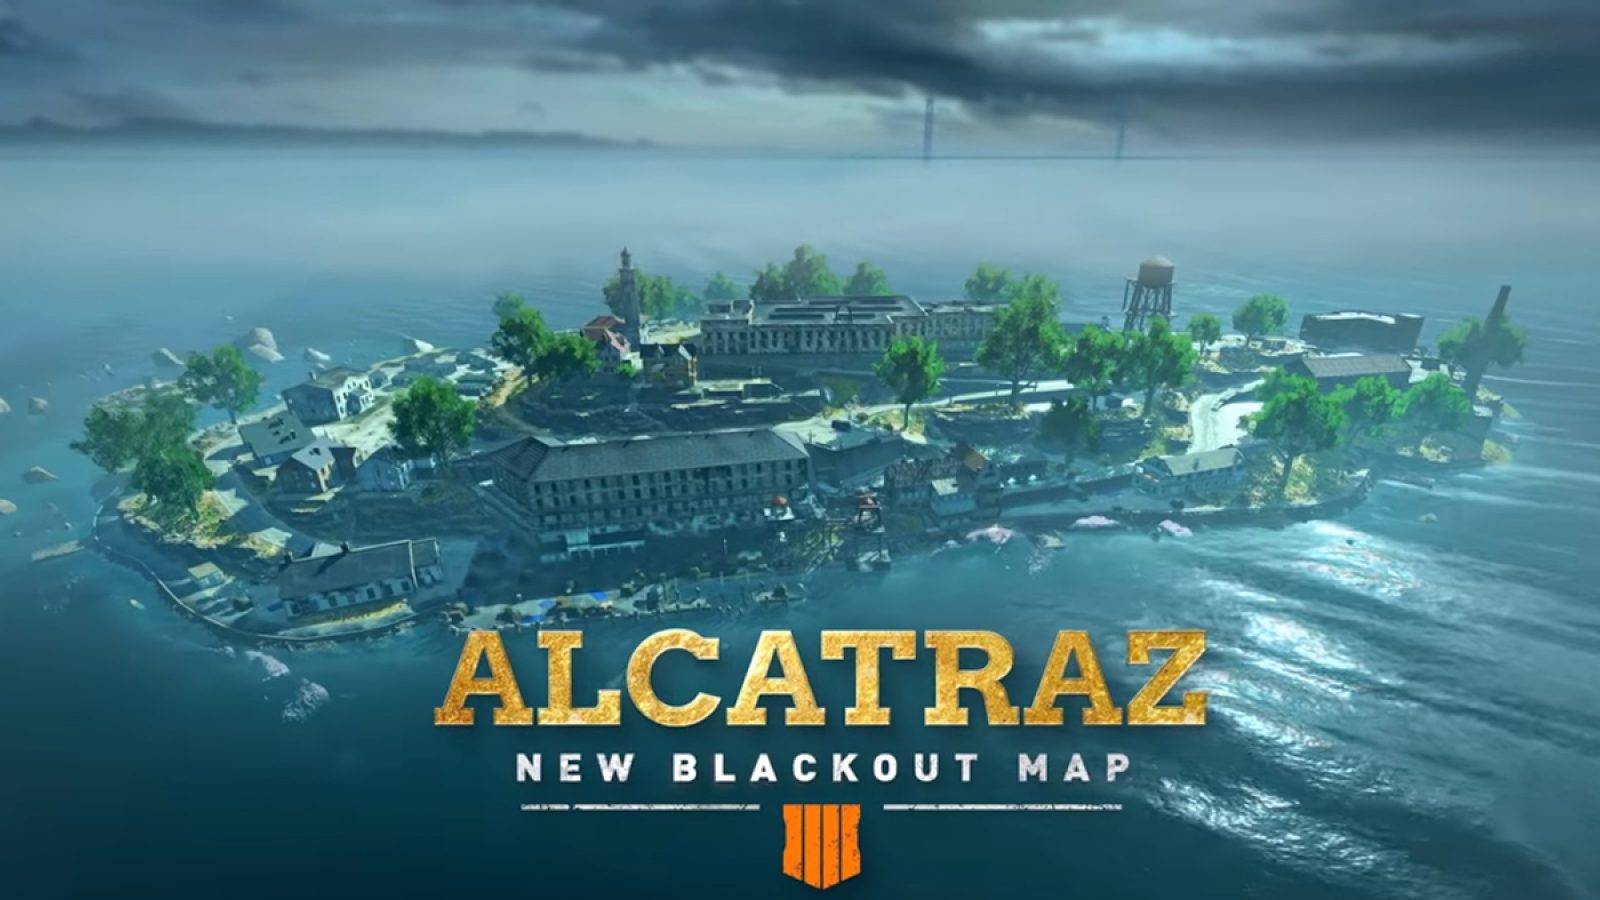 Black Ops 4: a new map for Blackout mode and a free trial month